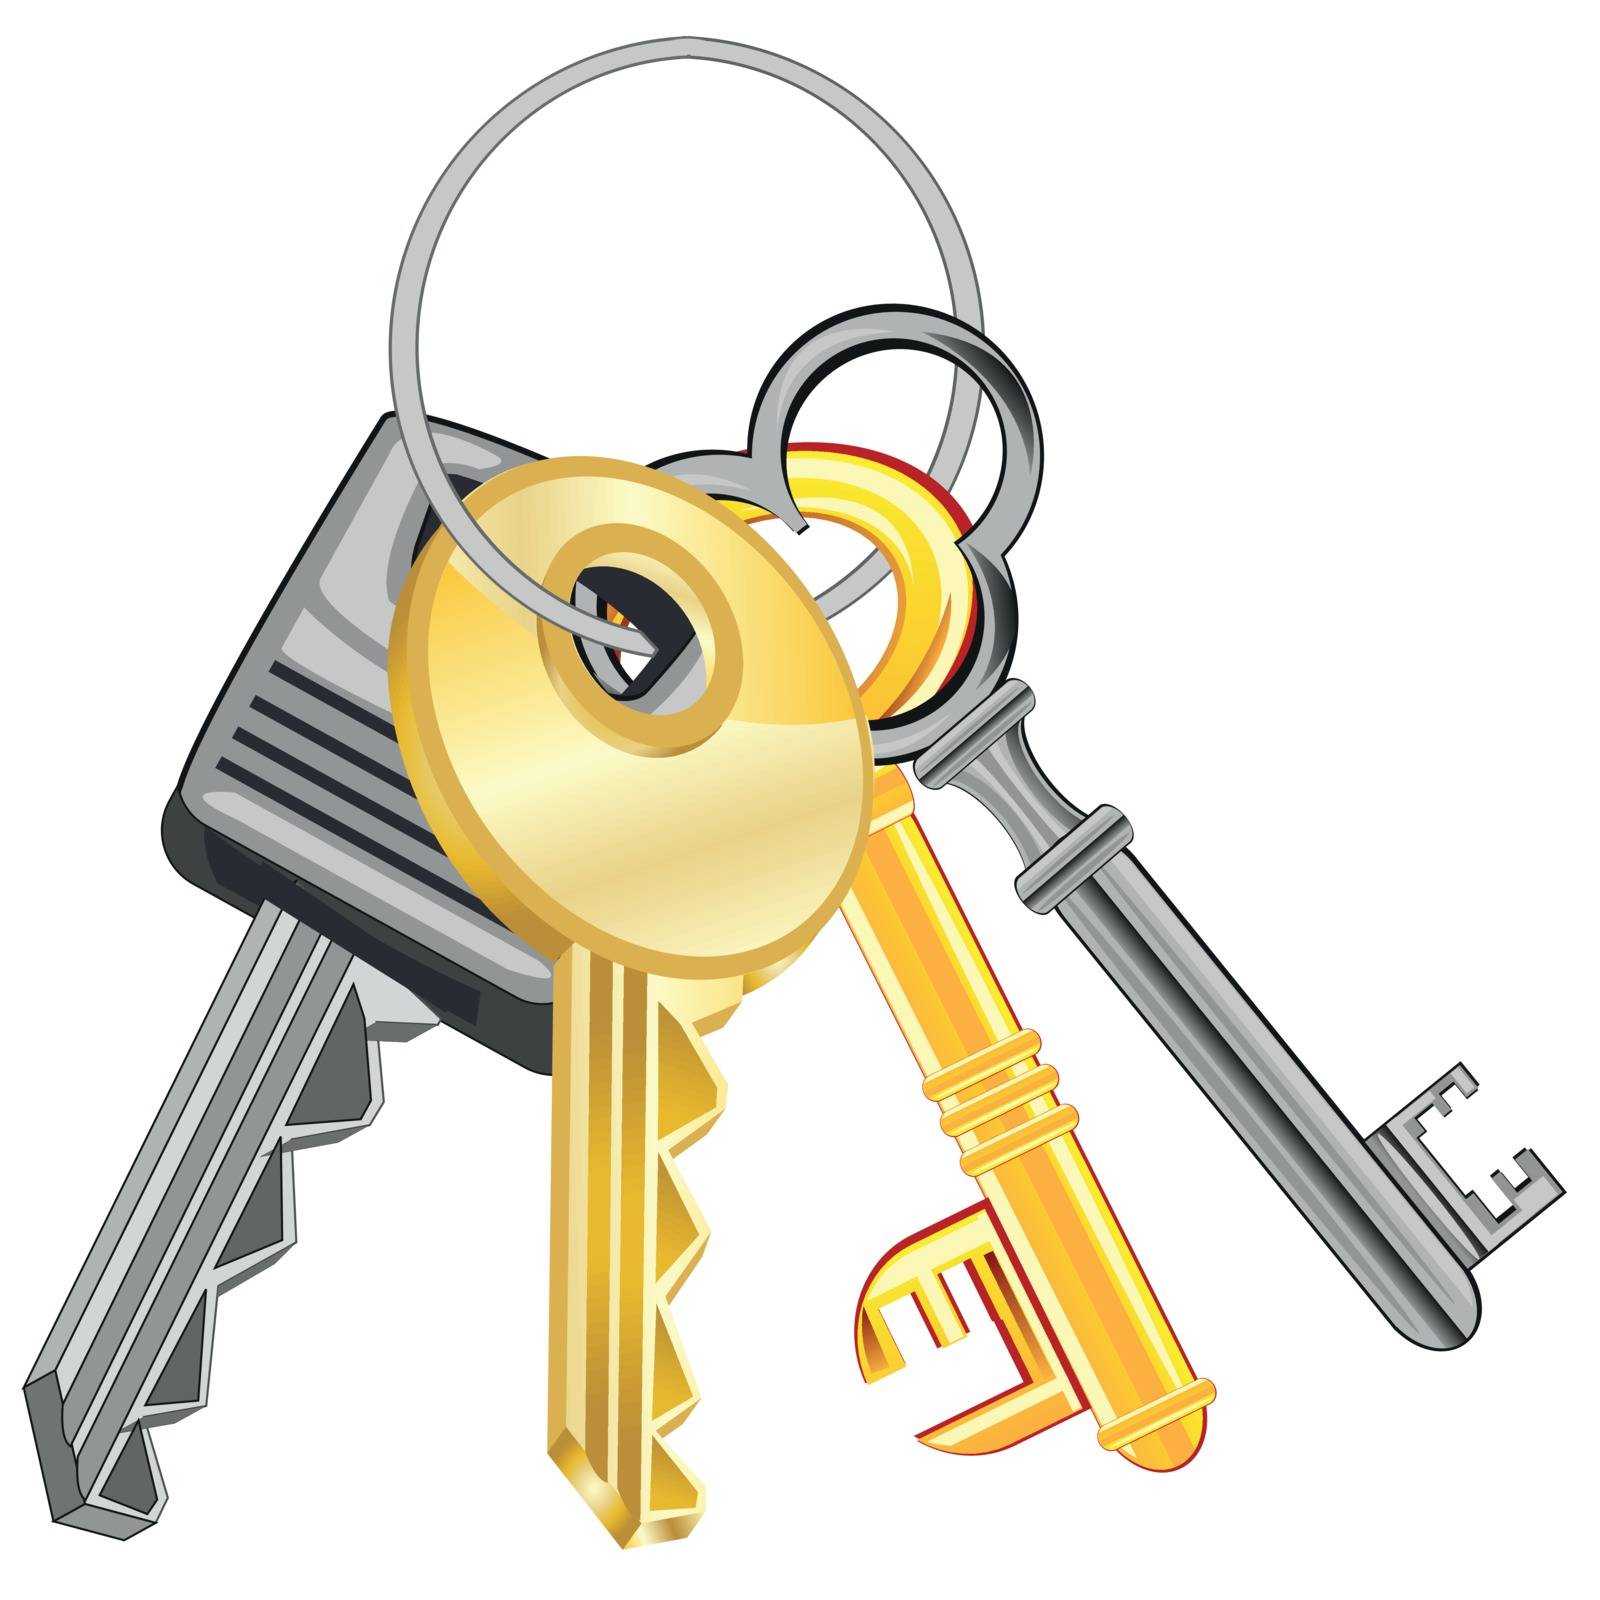 Much keys from doors on white background is insulated